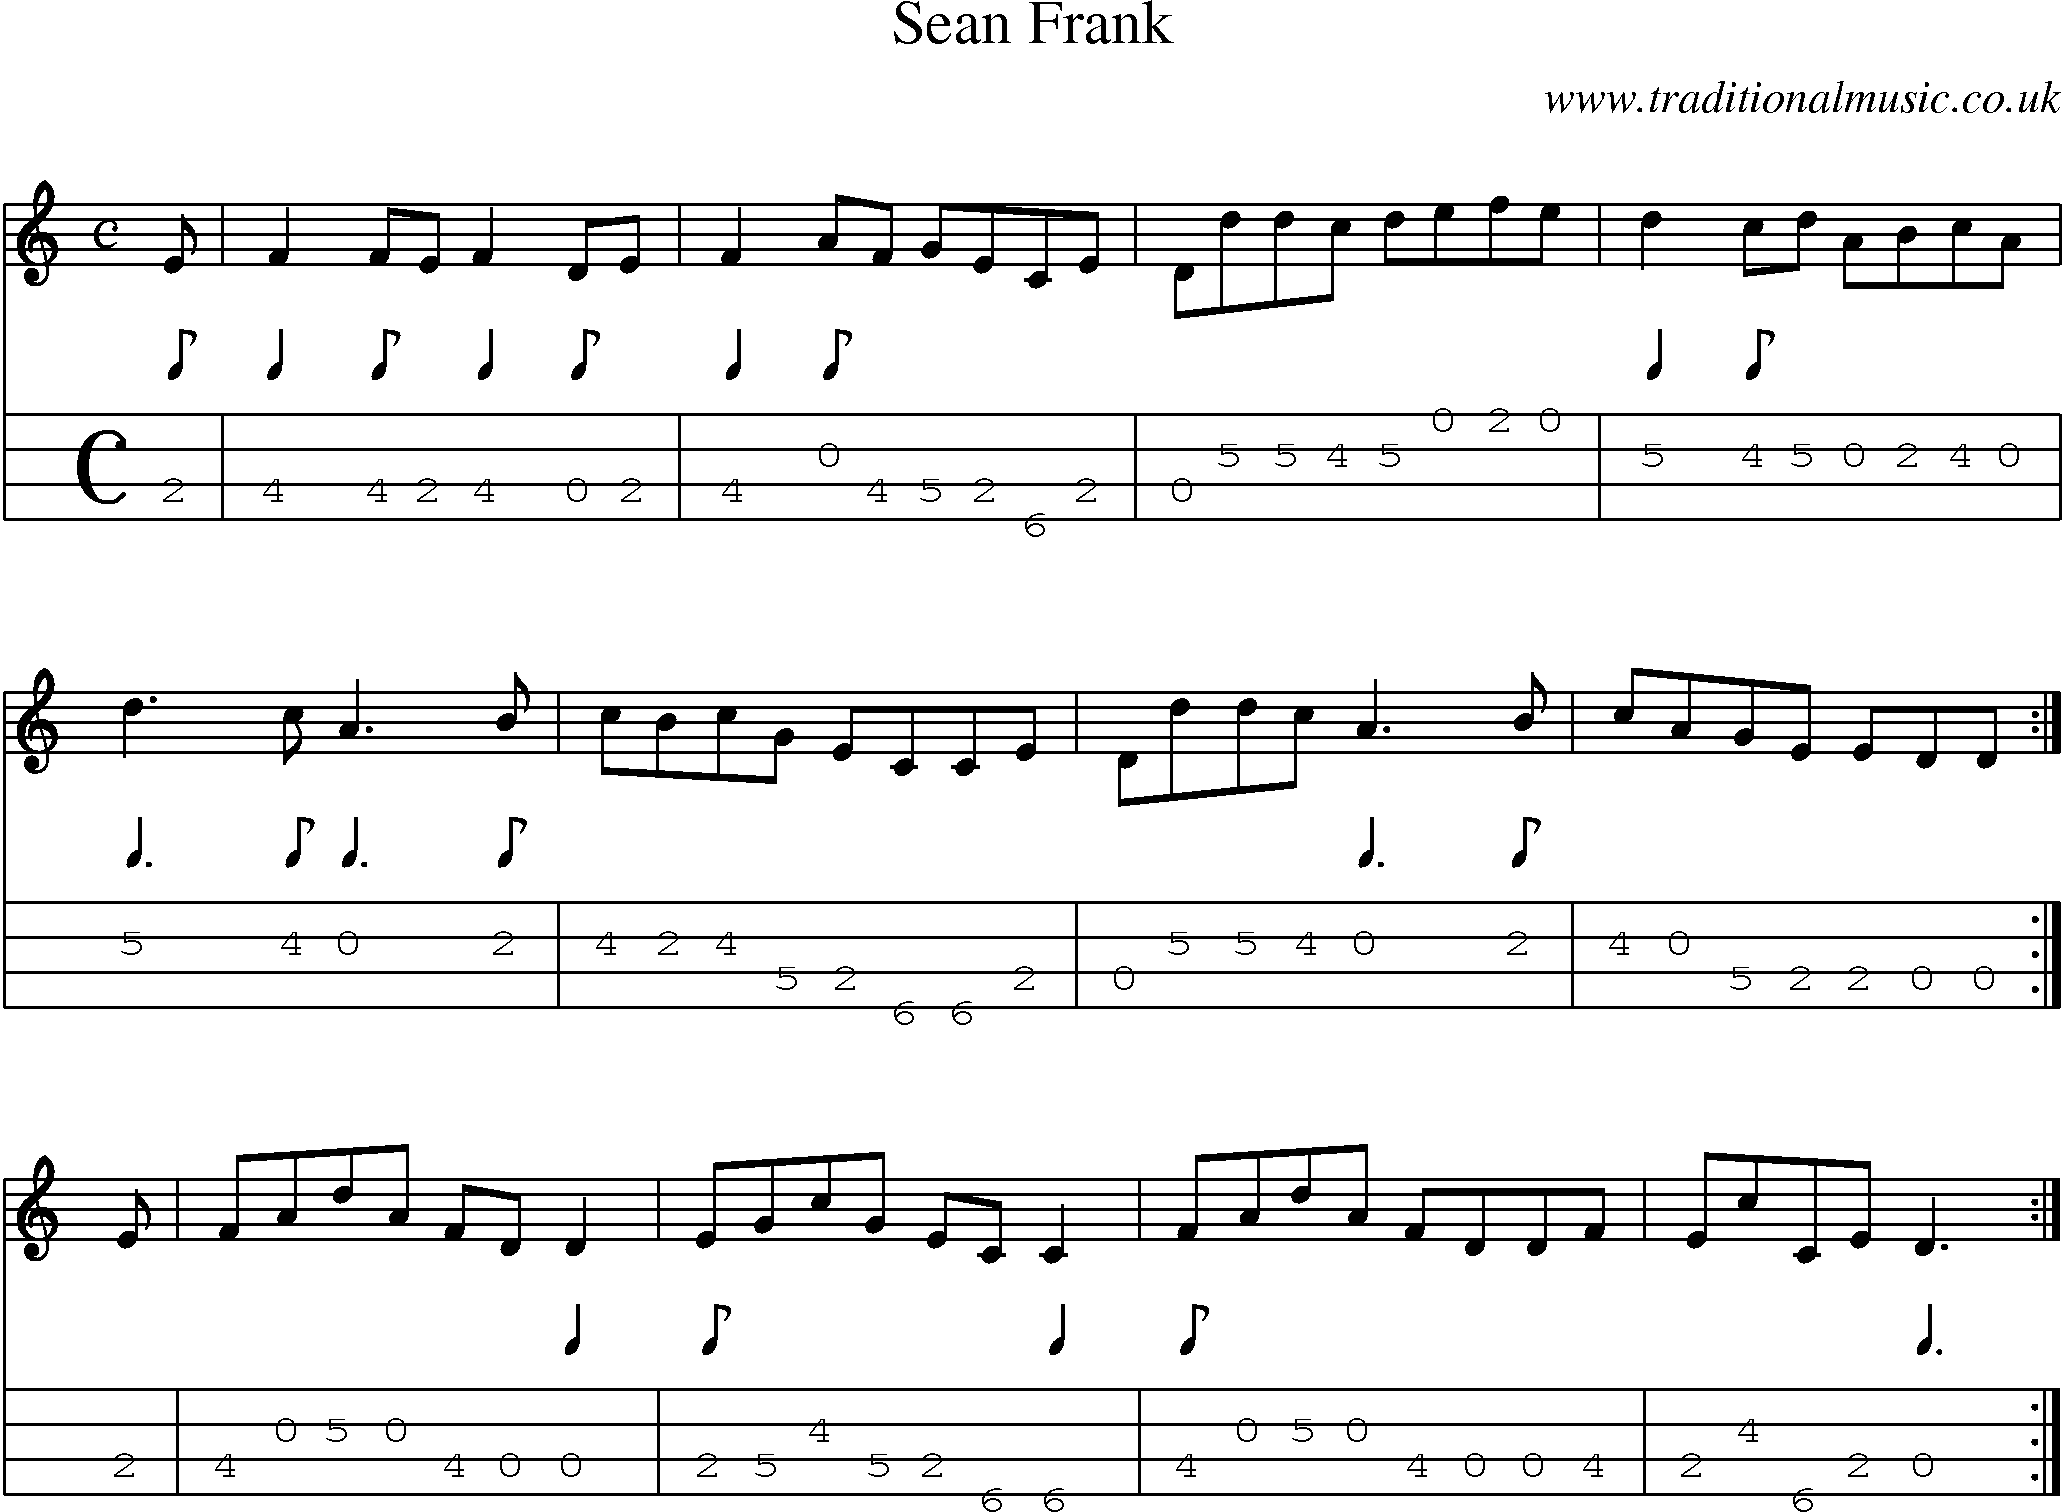 Music Score and Mandolin Tabs for Sean Frank